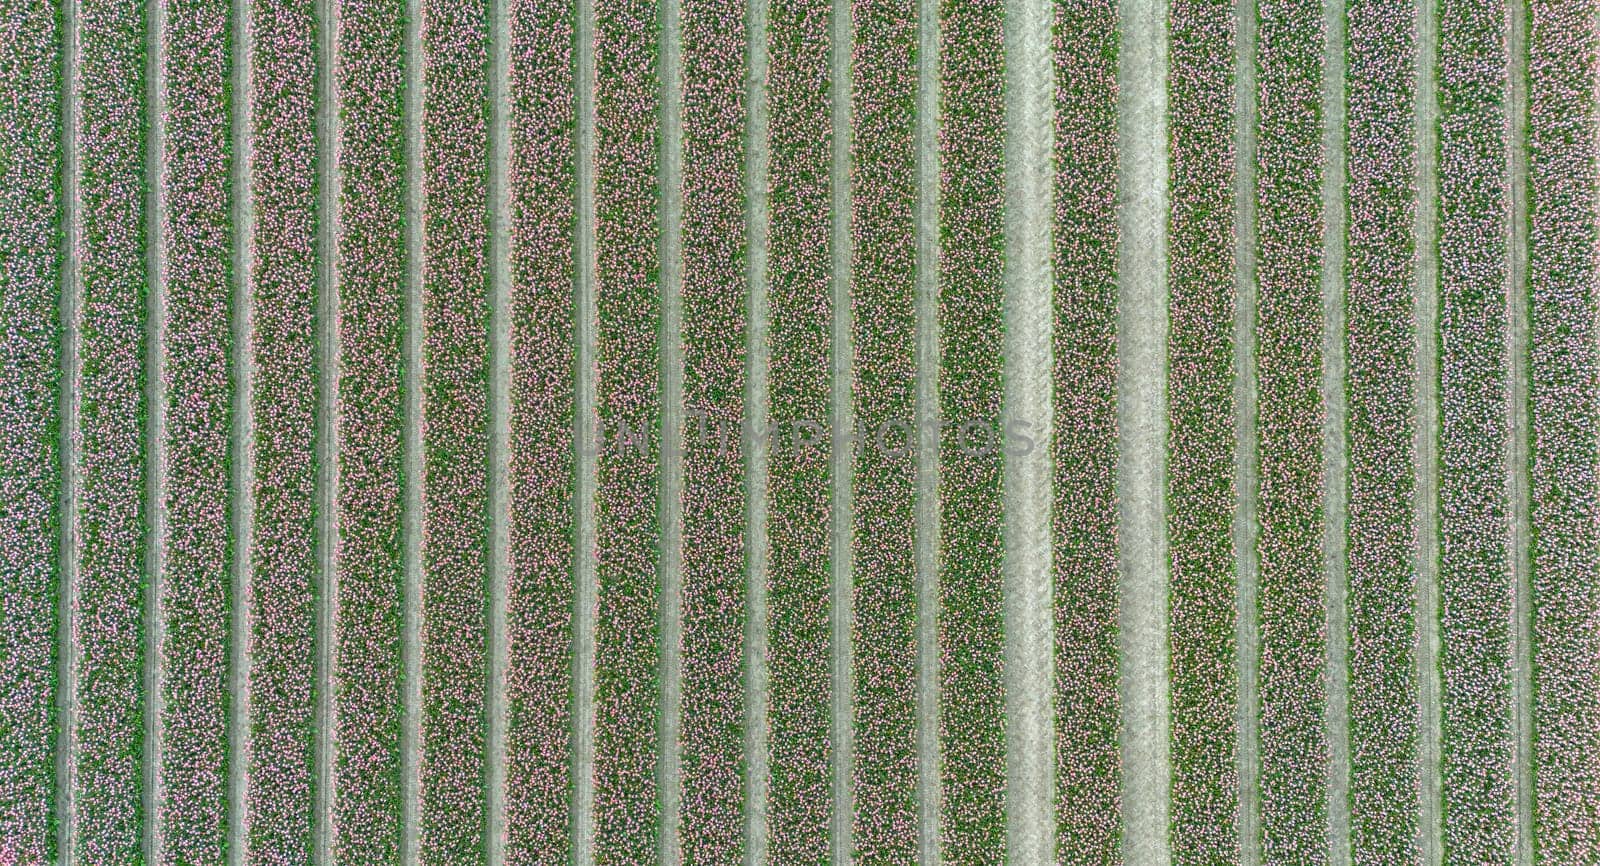 pink tulip fields in spring in the netherlands dronehoto top view by compuinfoto